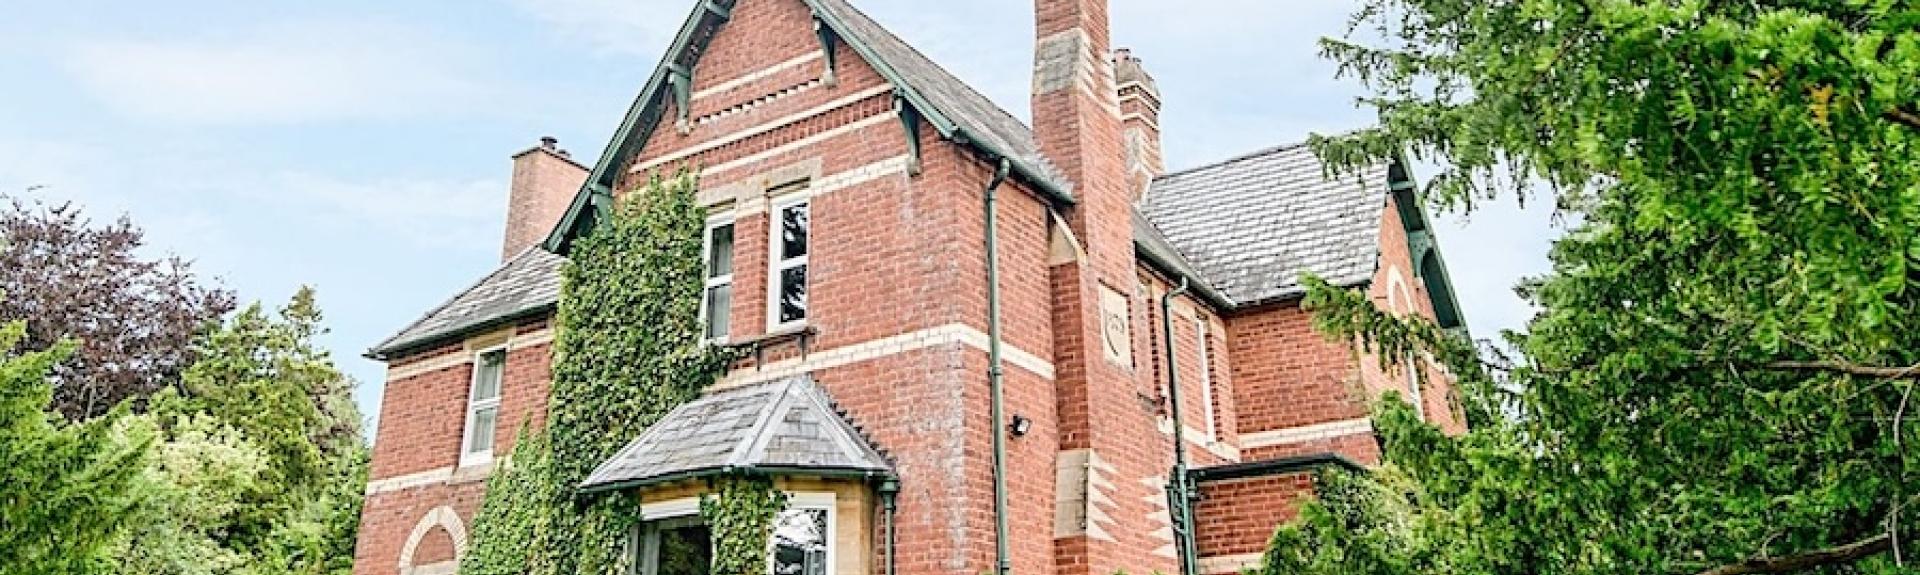 Brick-built Victorian vicarage surrounded by a tree-lined garden.